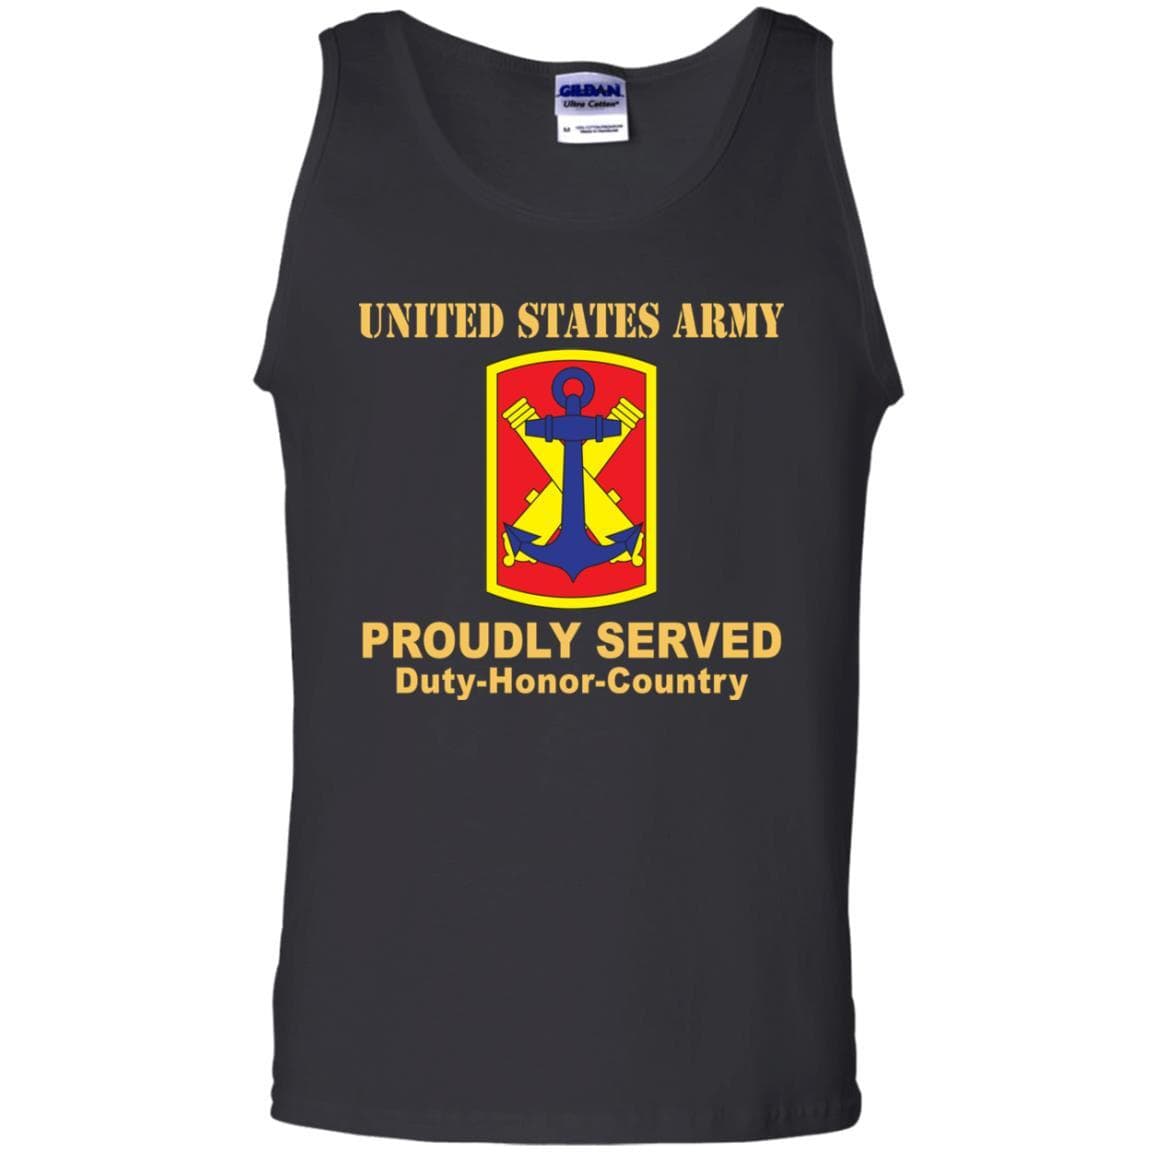 US ARMY 103 FIELD ARTILLERY BRIGADE- Proudly Served T-Shirt On Front For Men-TShirt-Army-Veterans Nation